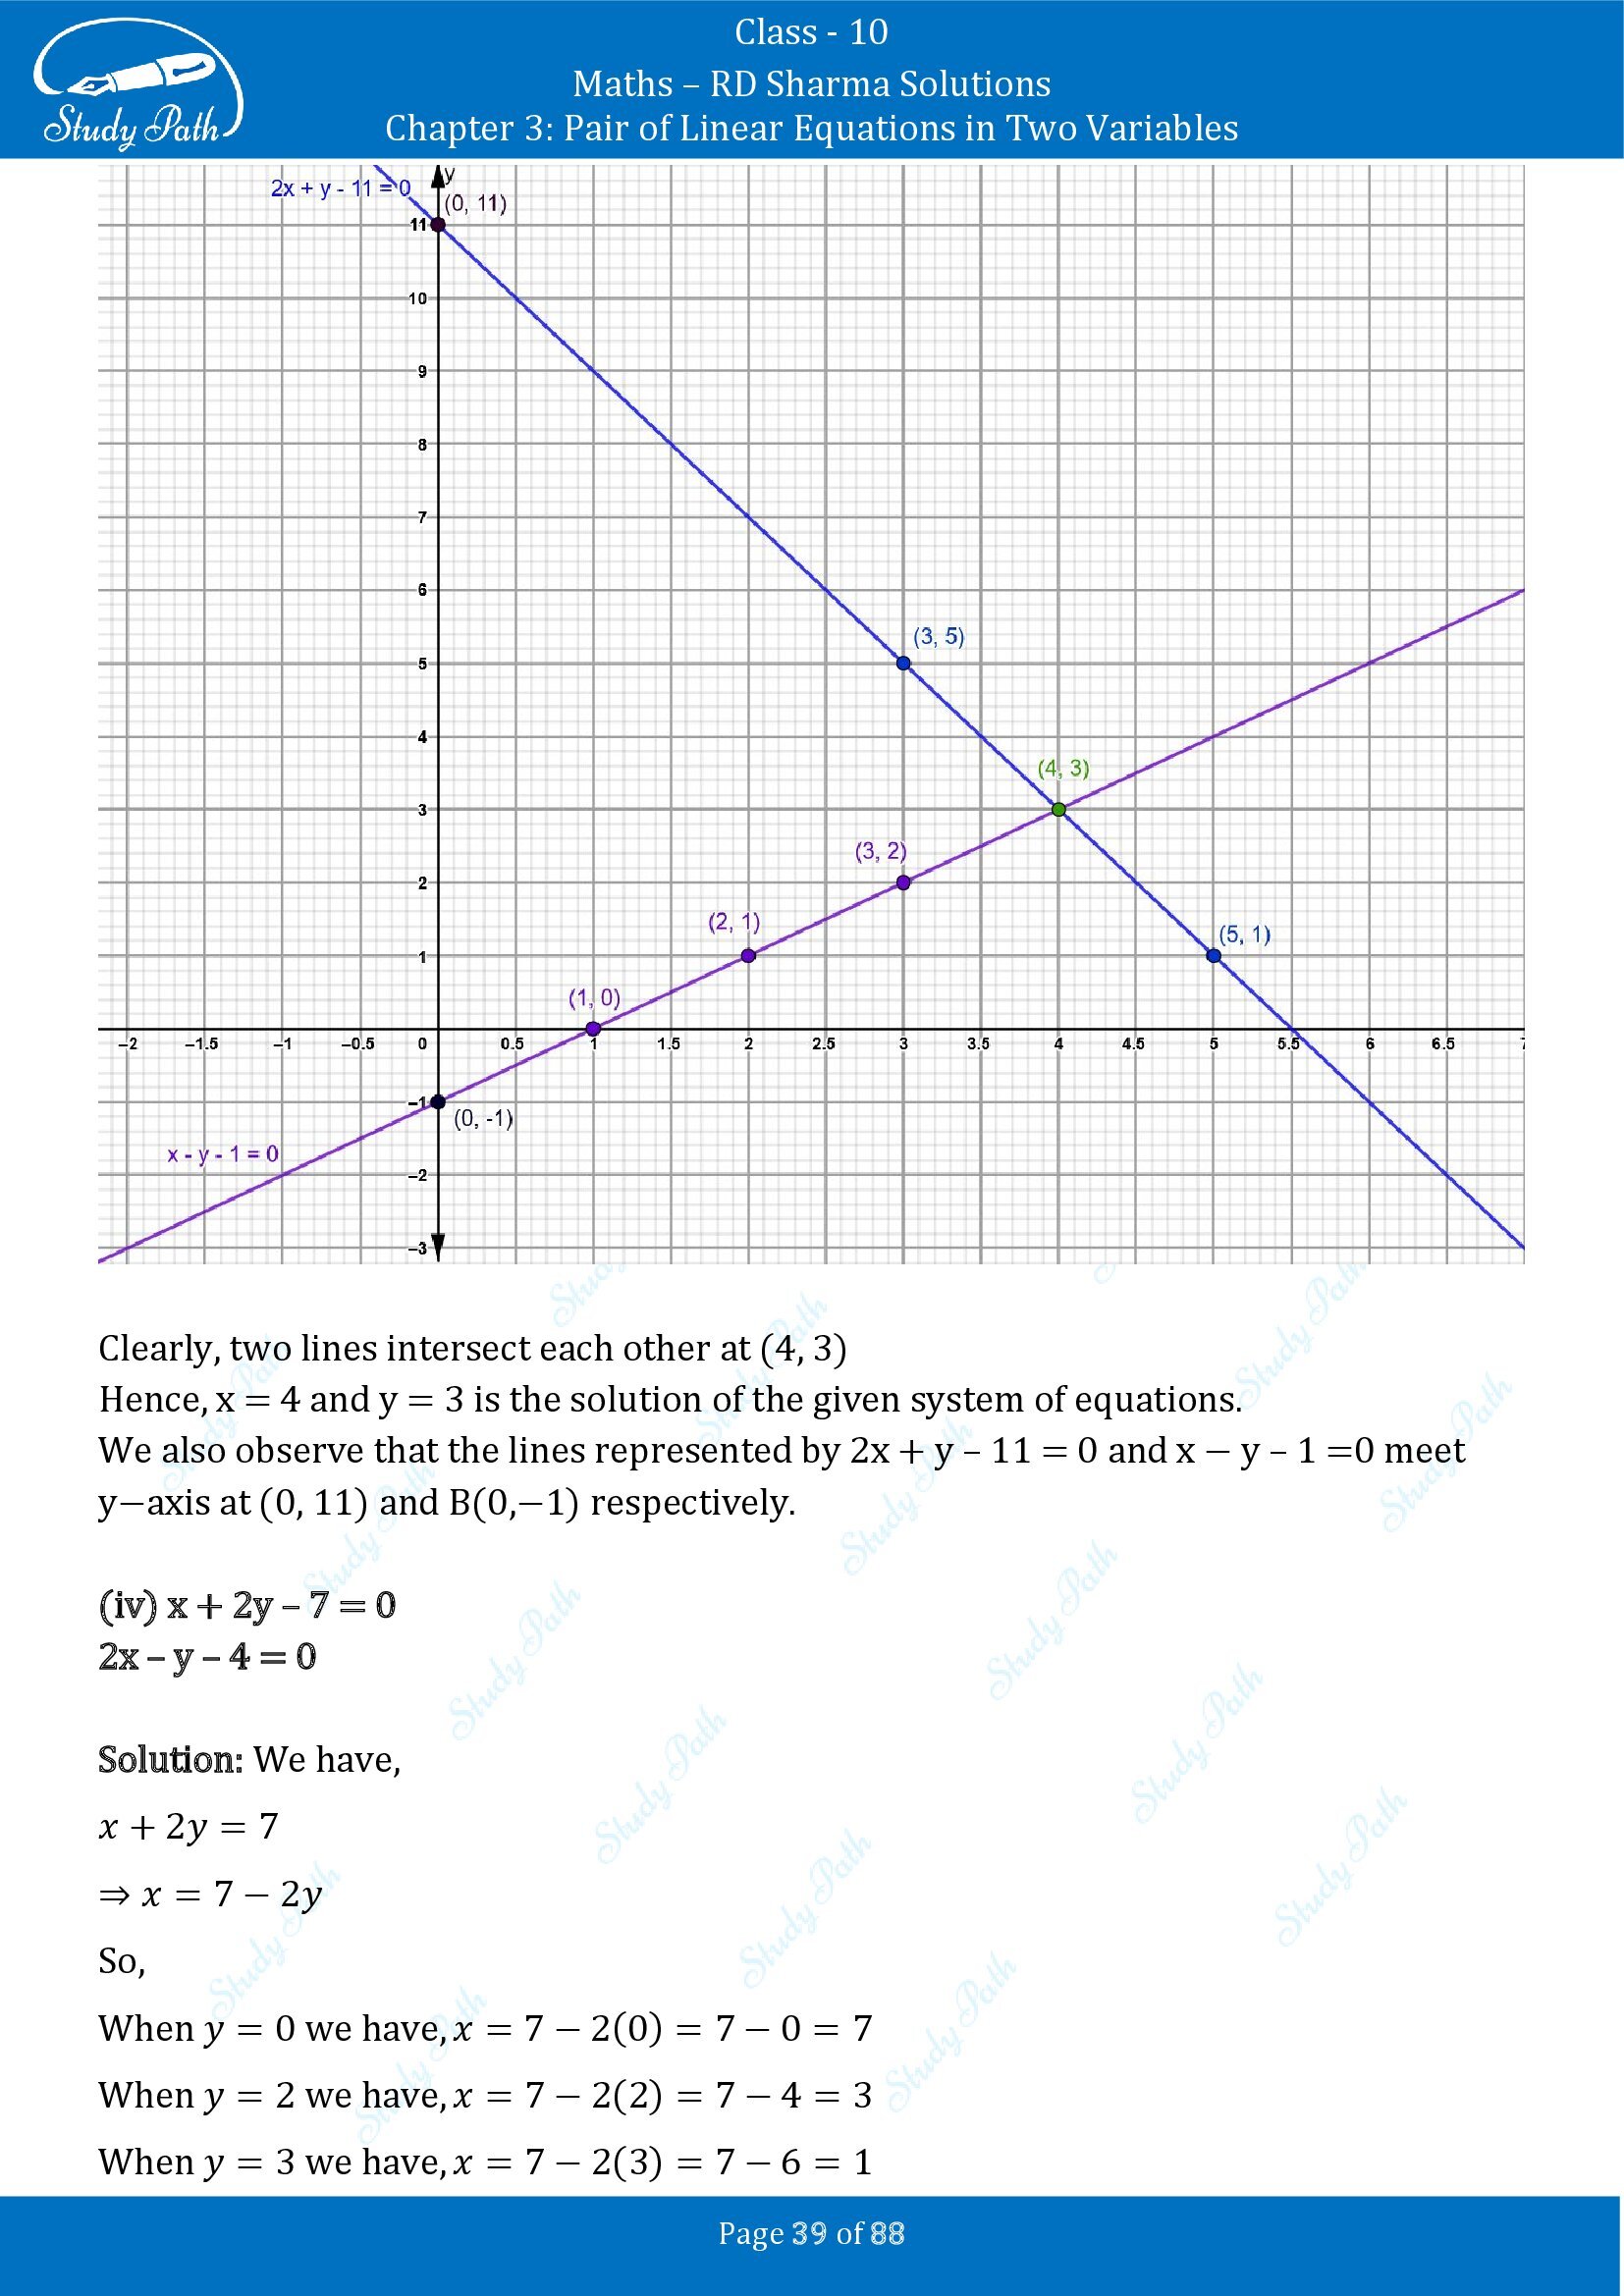 RD Sharma Solutions Class 10 Chapter 3 Pair of Linear Equations in Two Variables Exercise 3.2 00039